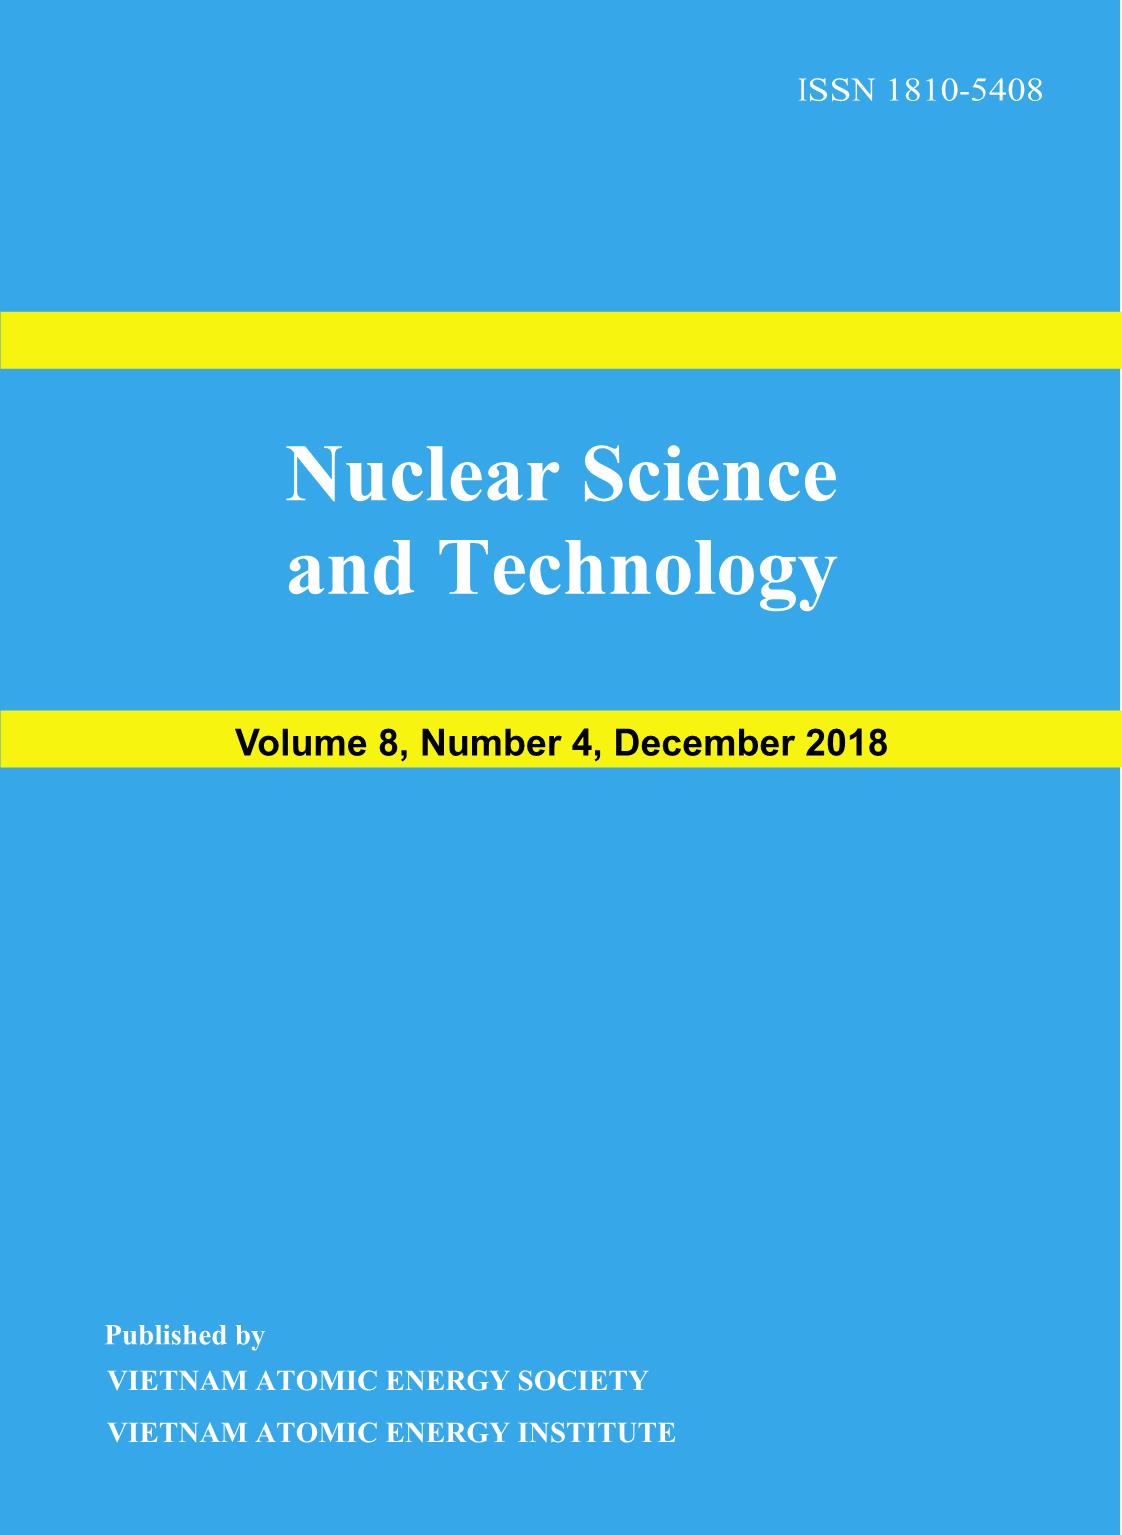 Nuclear Science and Technology - Volume 8, Number 4, December 2018 trang 1